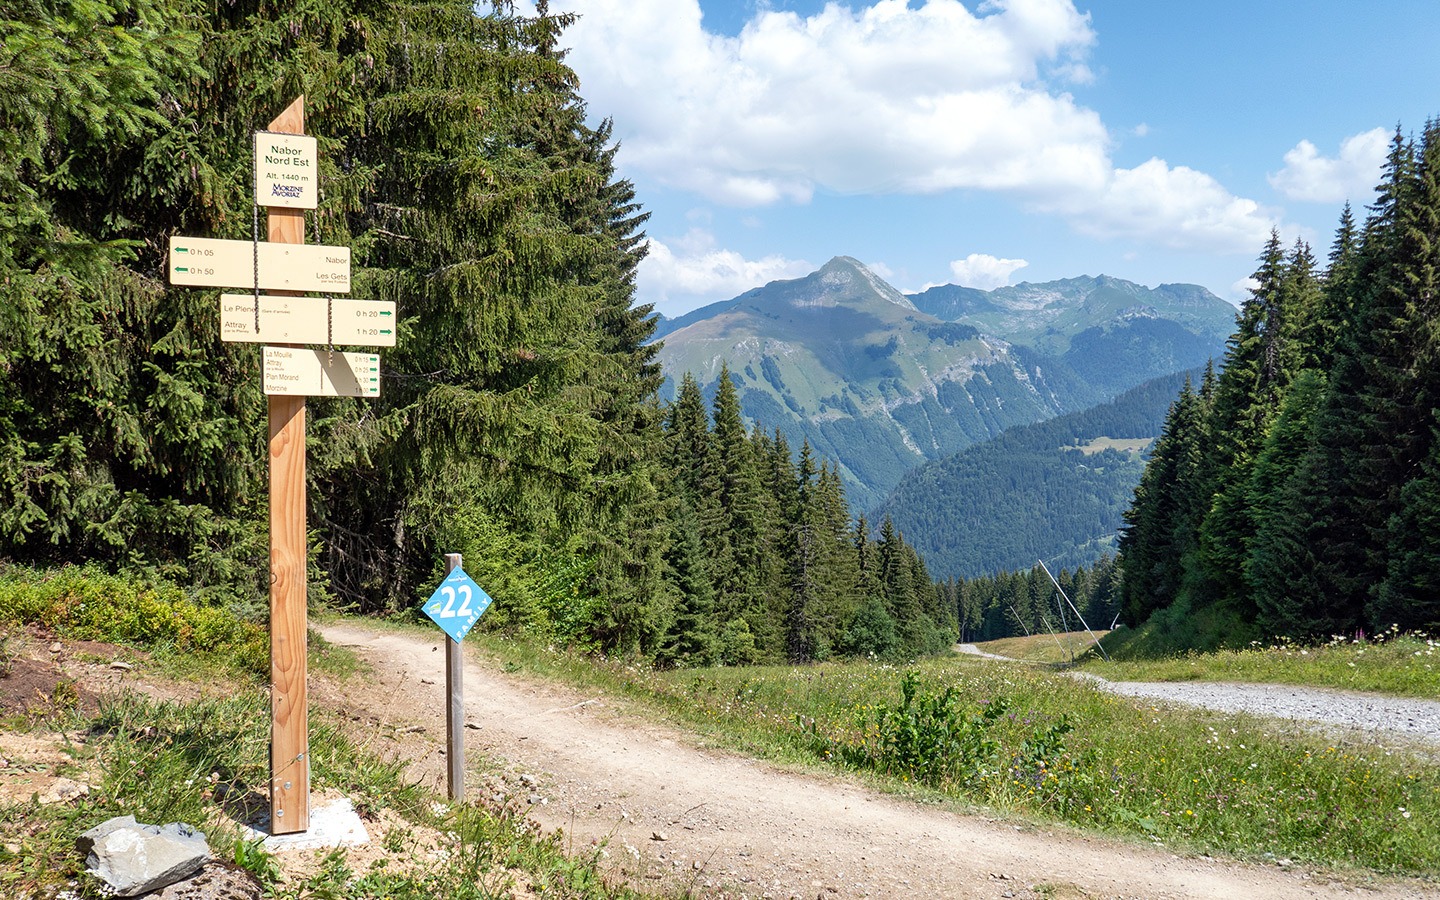 Summer walking in Morzine in the French Alps